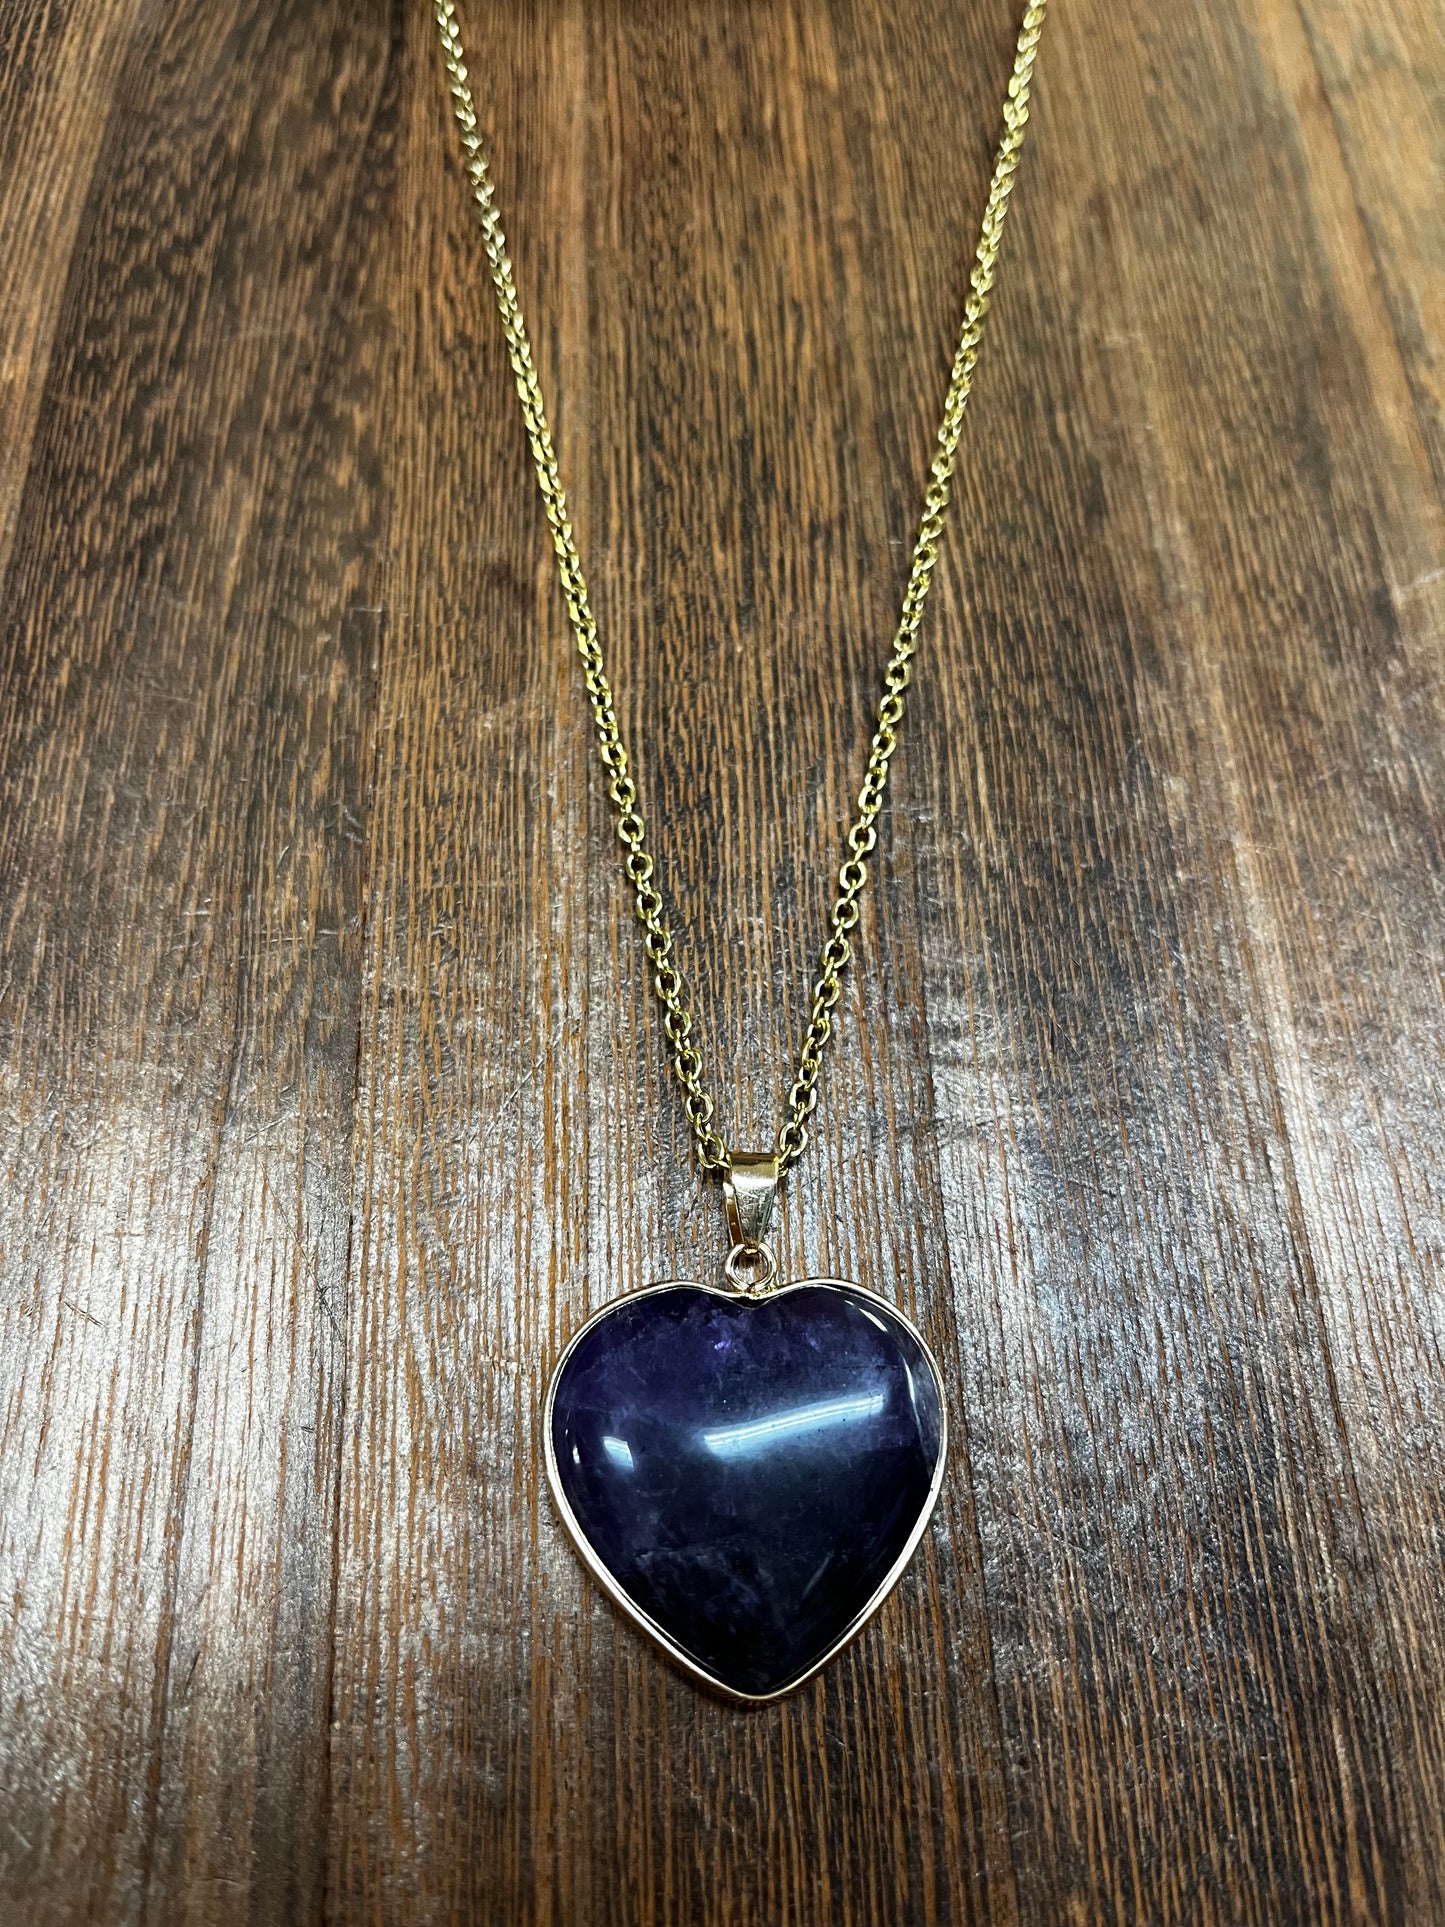 Stone Necklaces | Heart Stone Encased in Gold